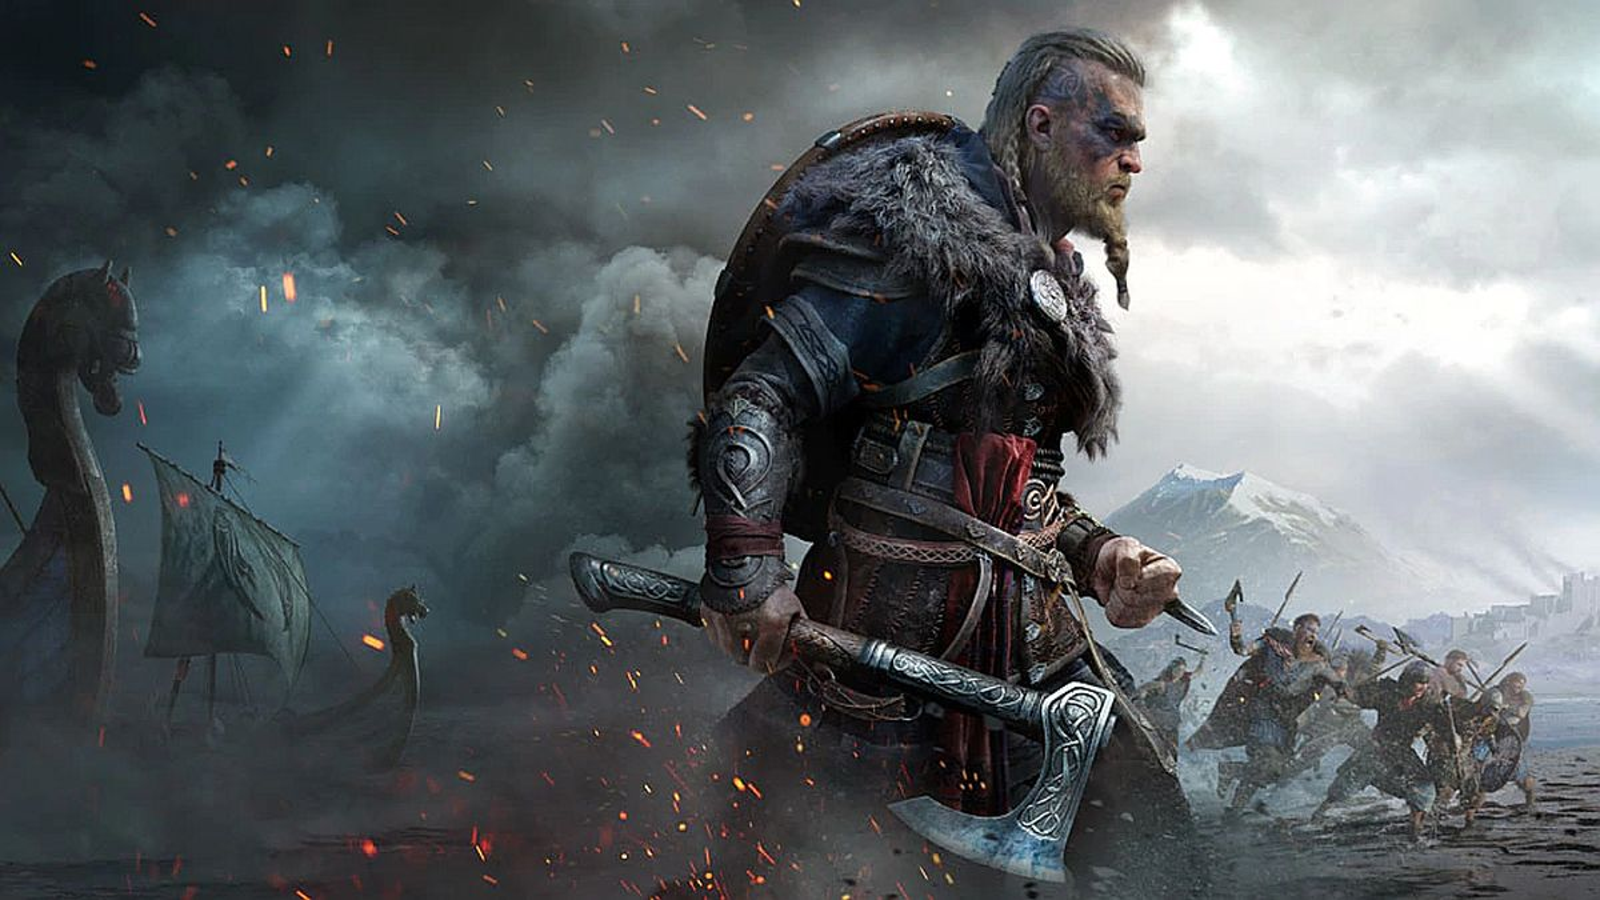 Assassin's Creed Valhalla: Dawn of Ragnarök review - a sizeable